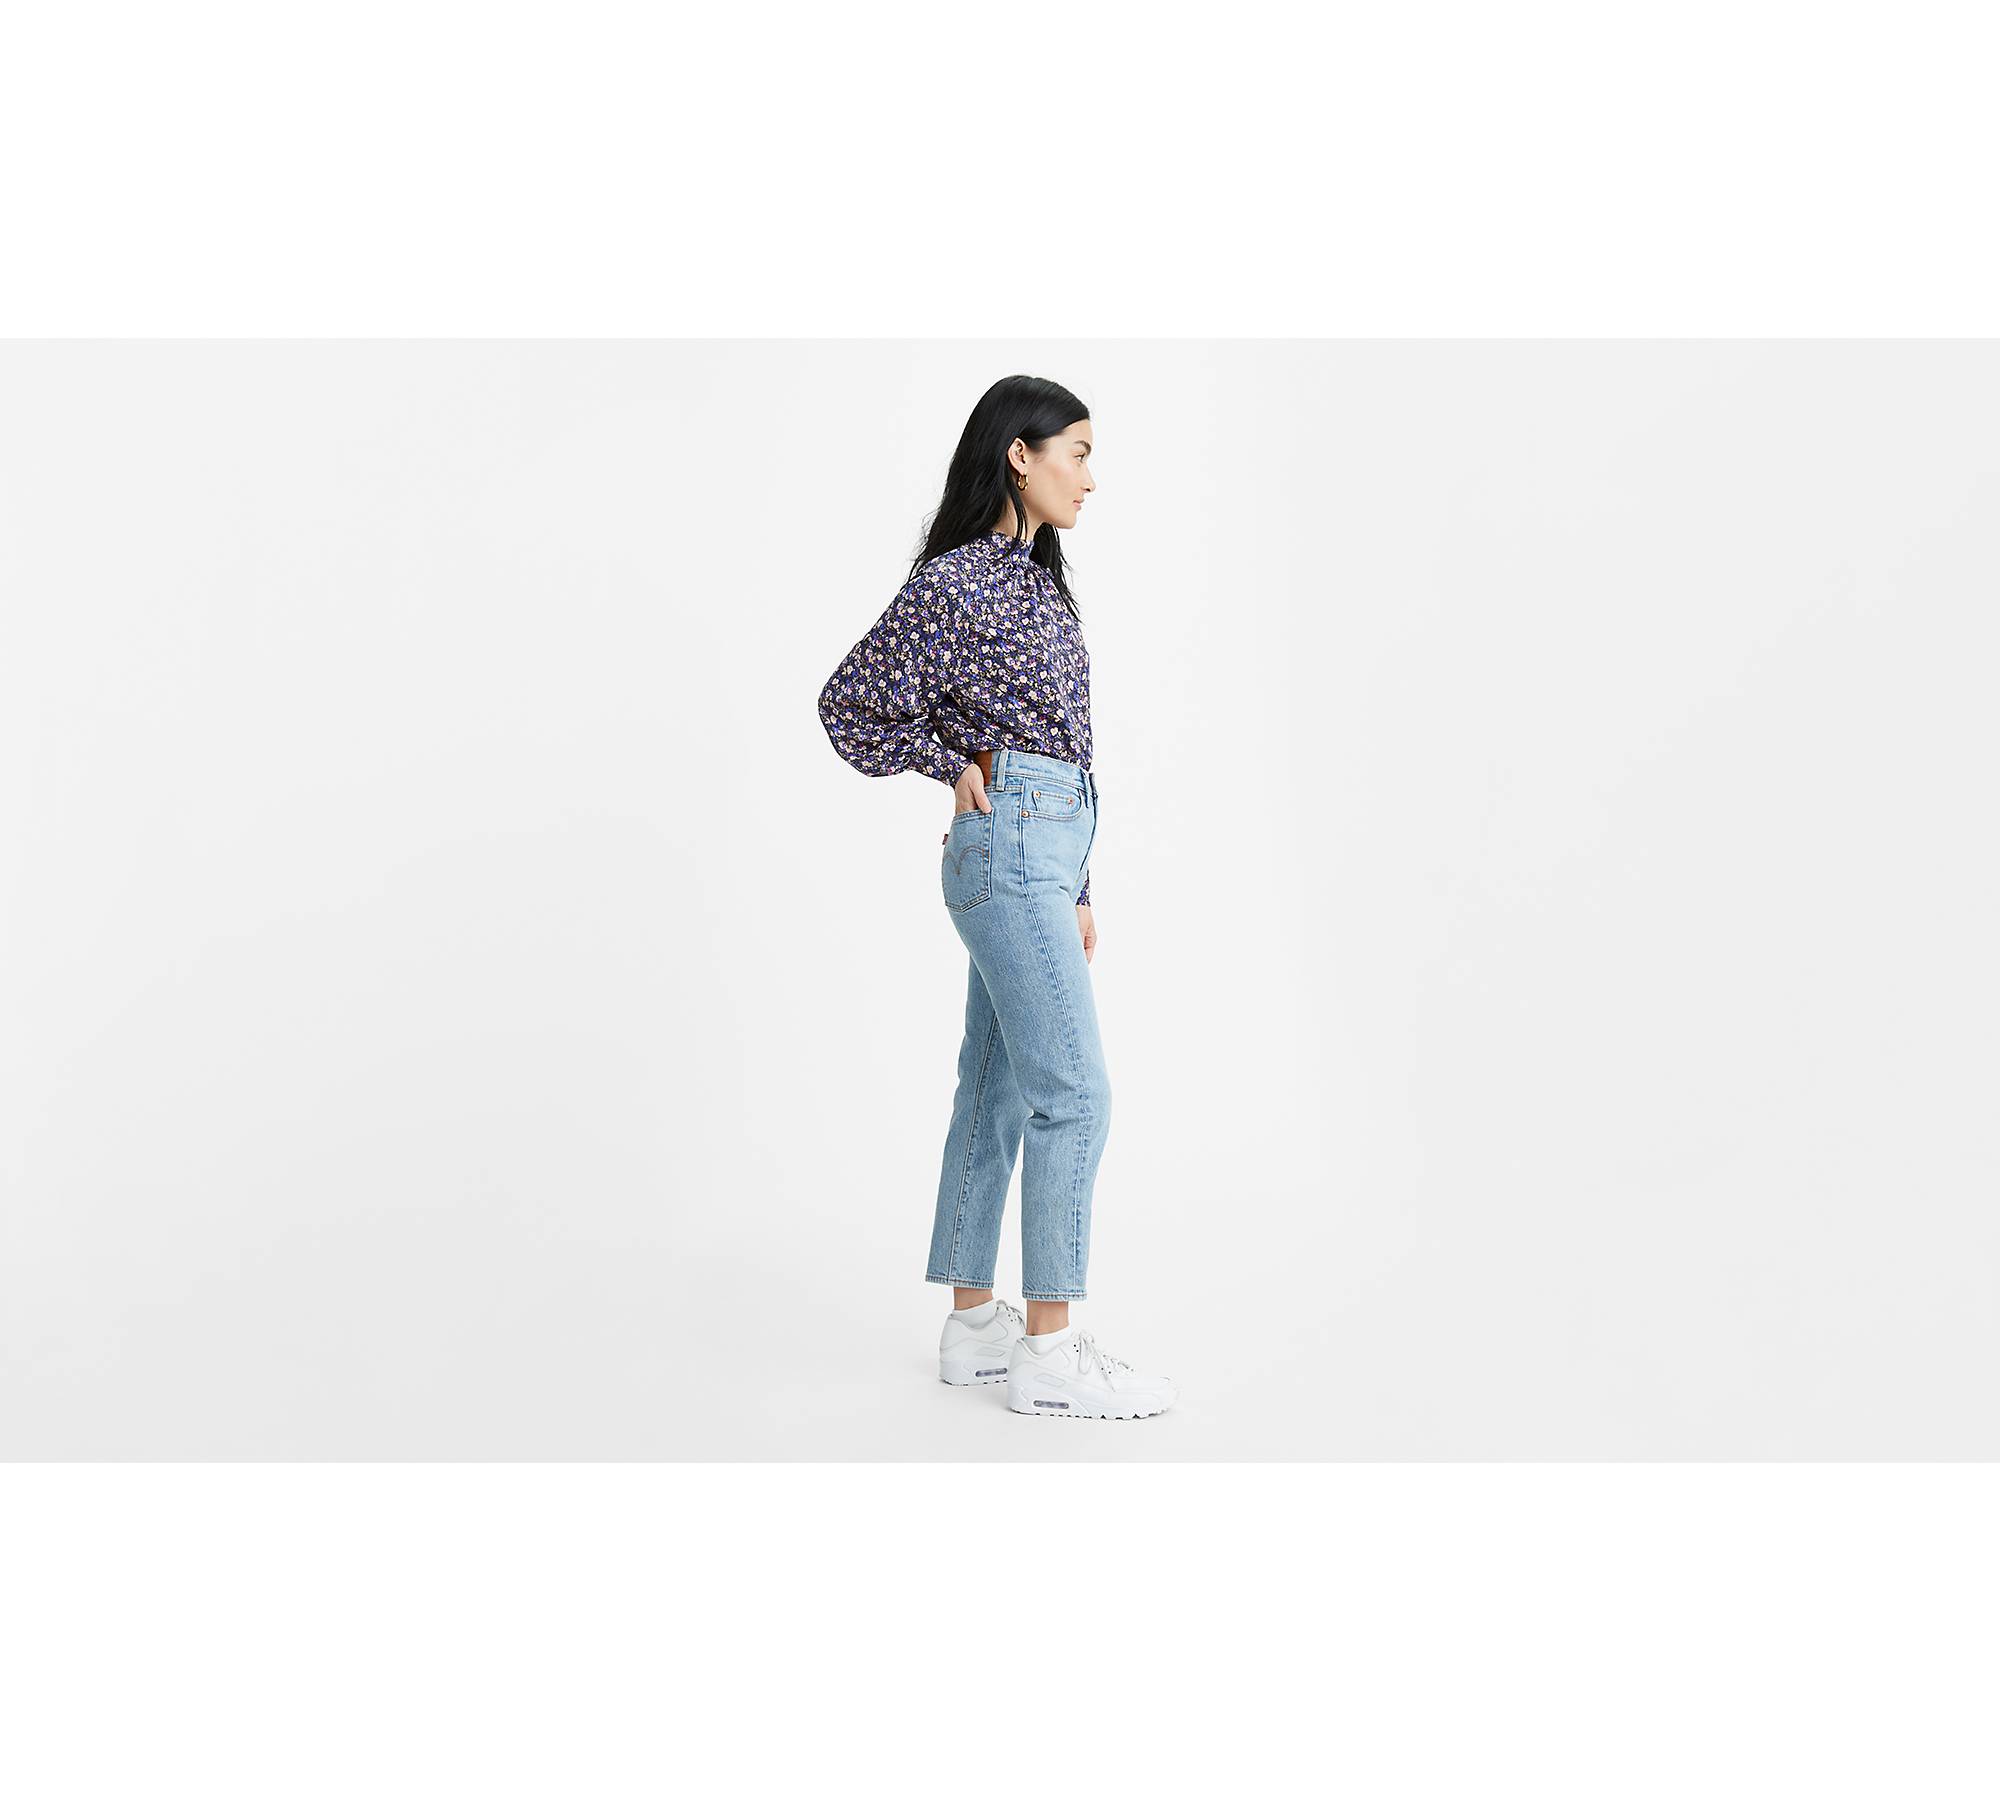 Levi's Wedgie Icon High-Rise Jeans